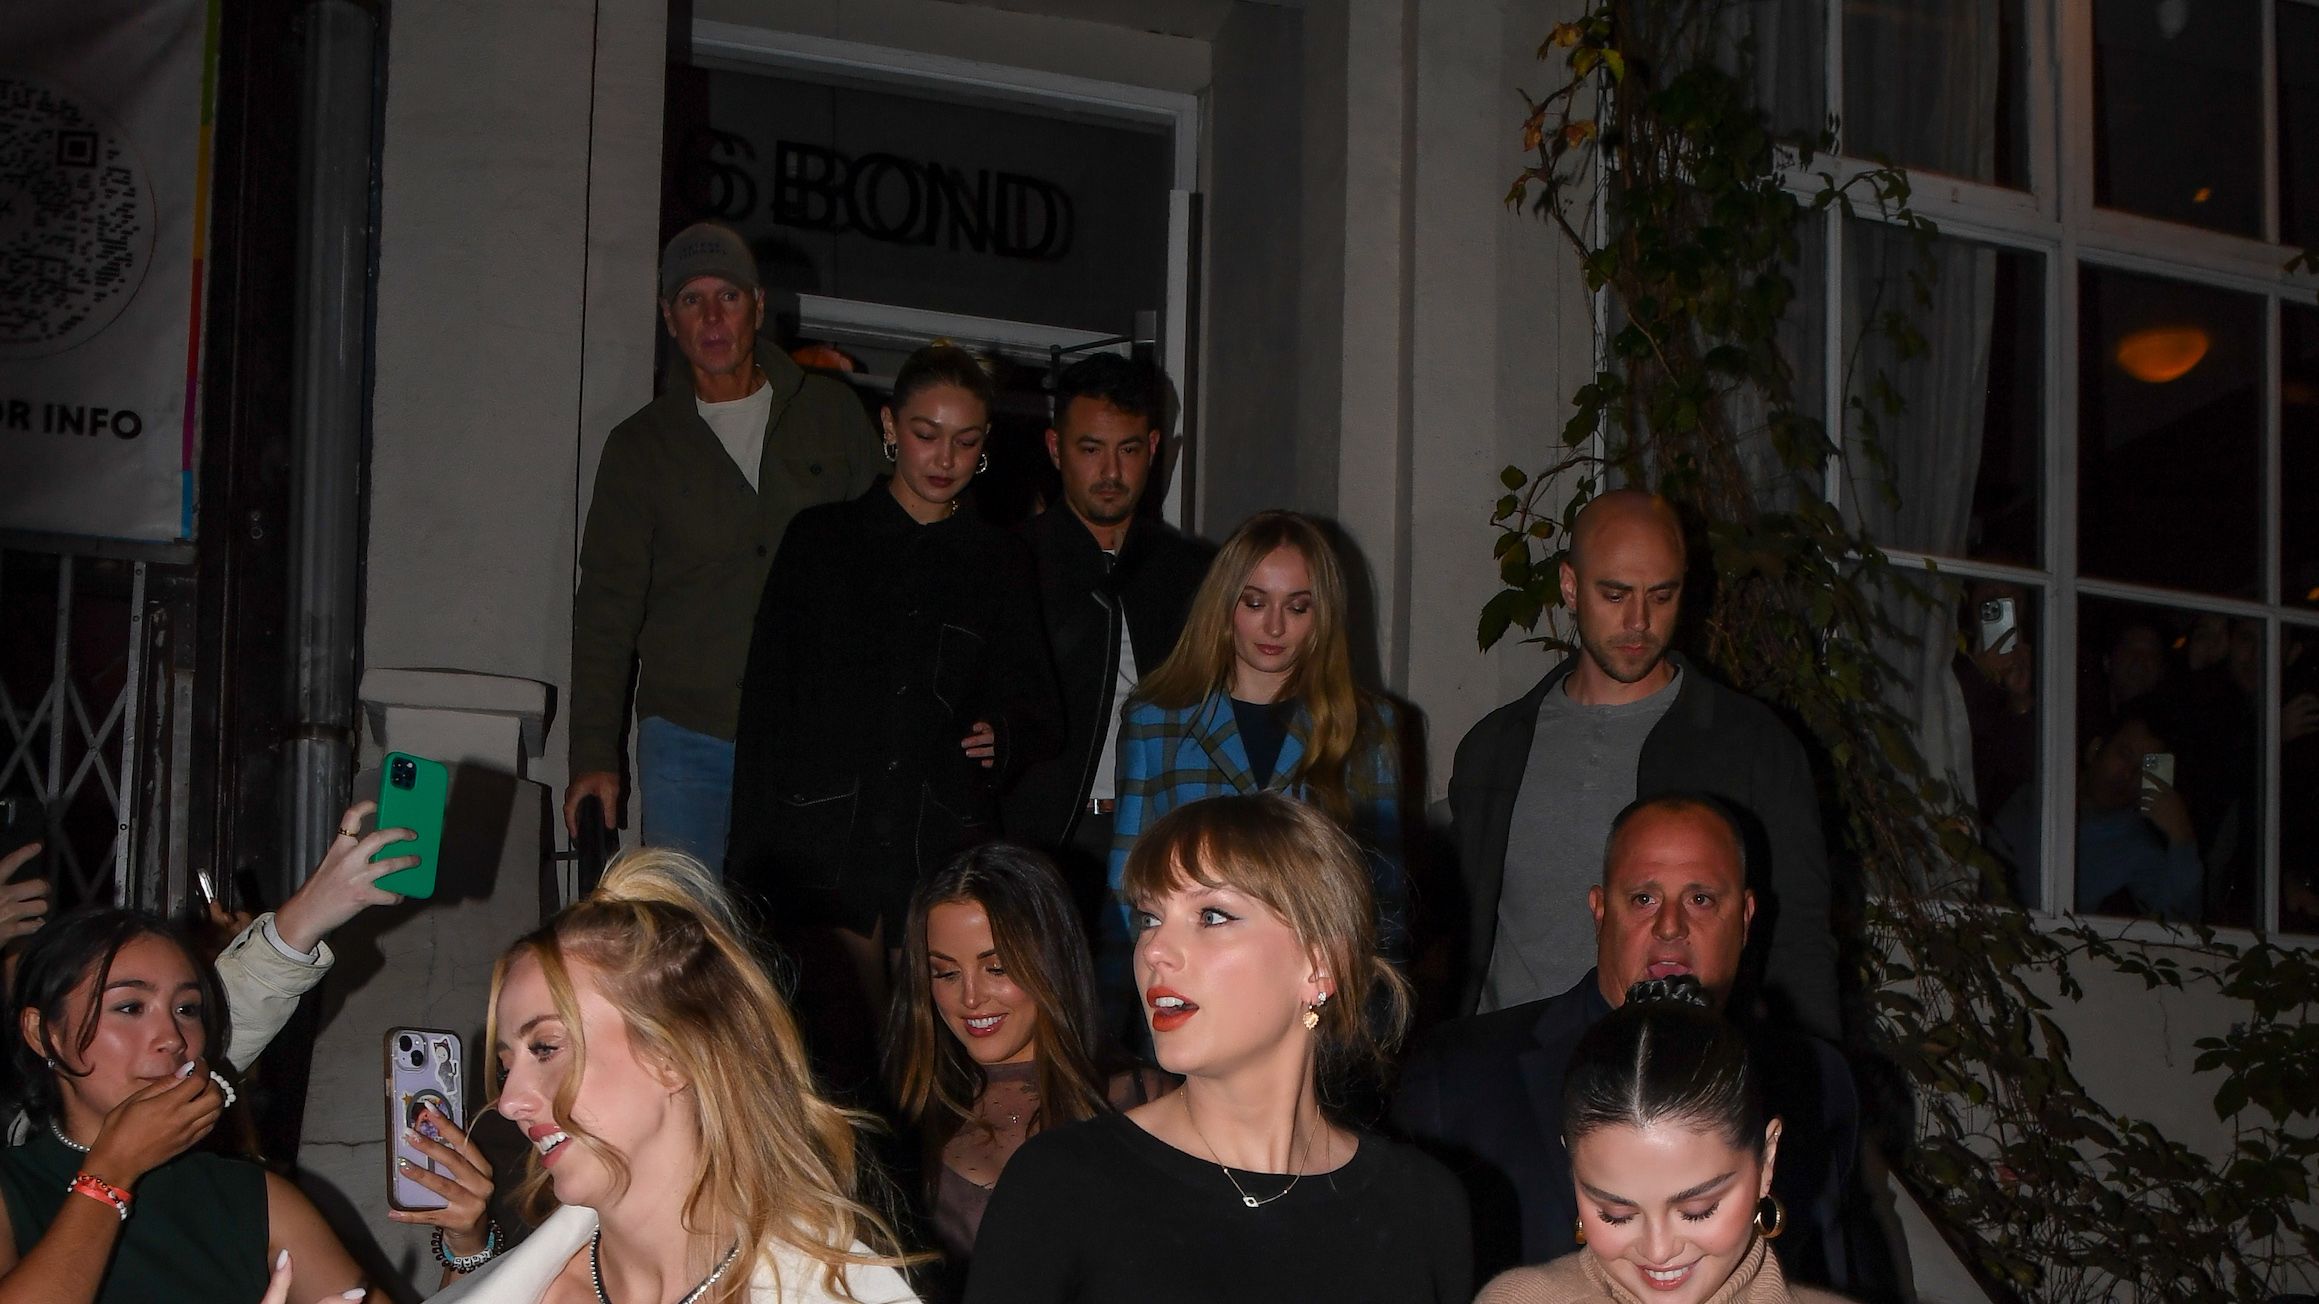 Taylor Swift and Sophie Turner Go Out to Dinner Again in New York City